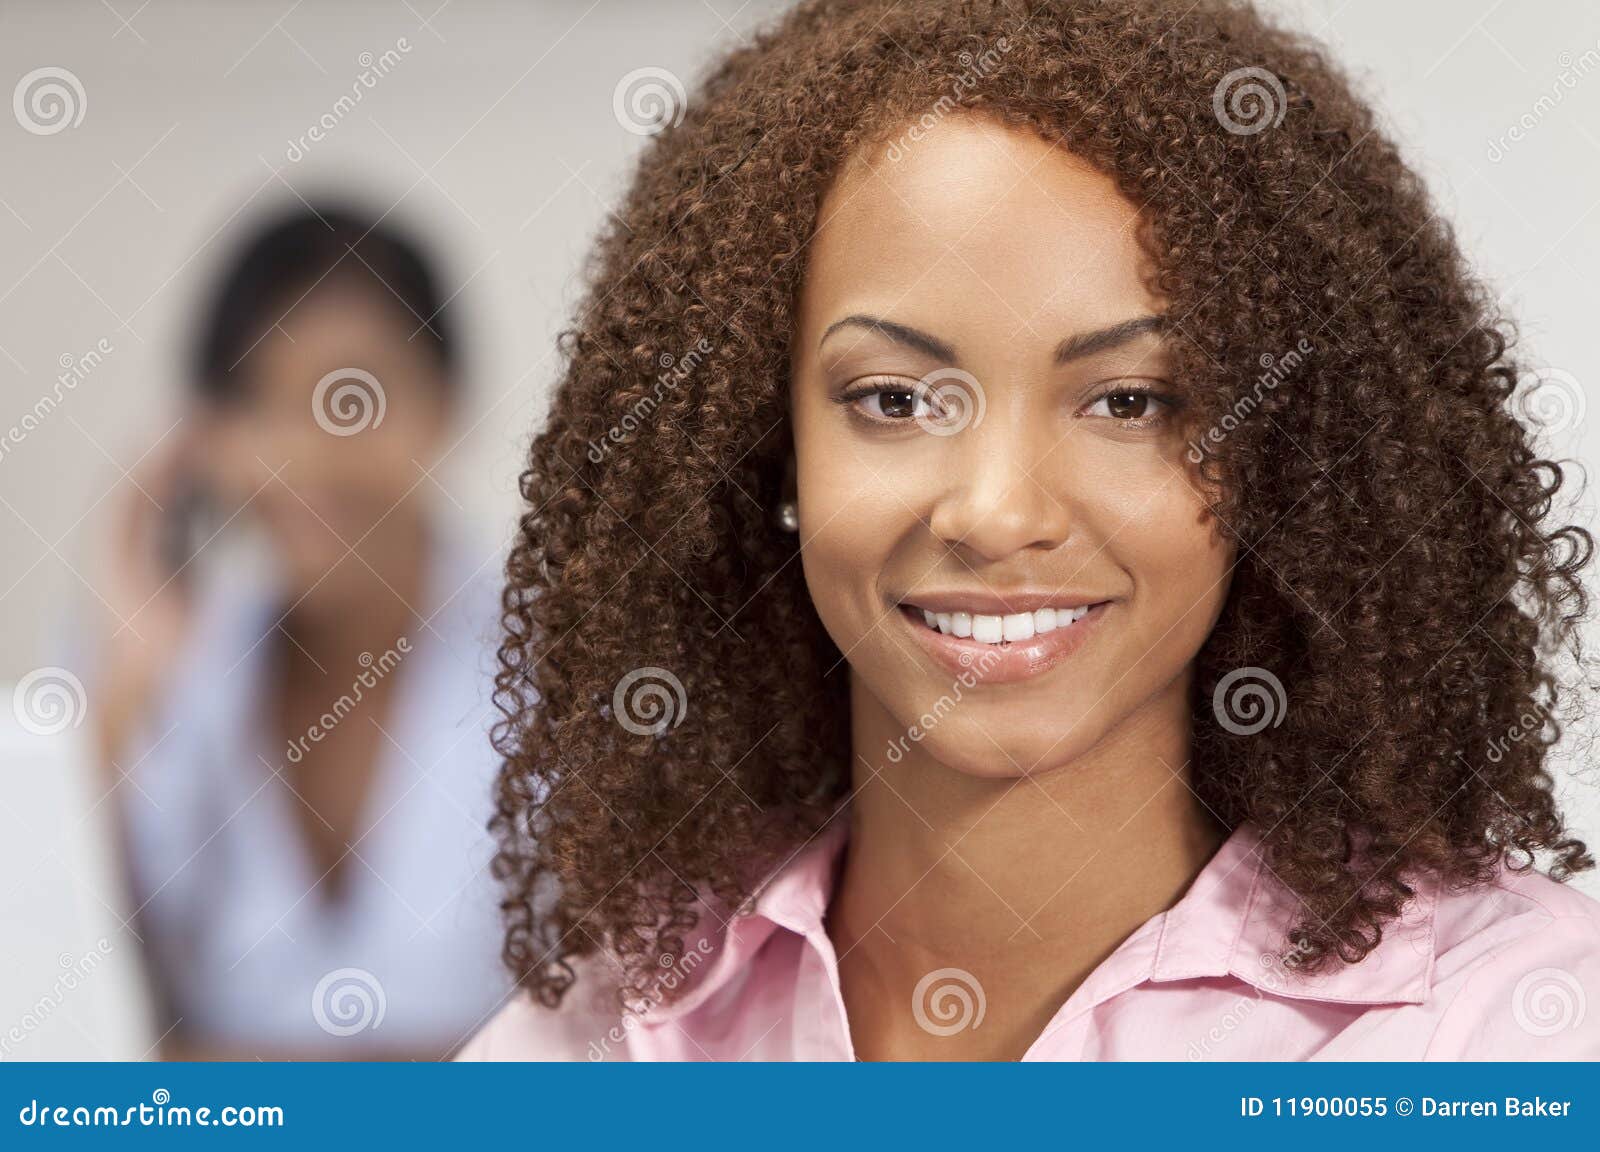 Mixed Race African American Gir Stock Image - Image perfect, calm: 11900055